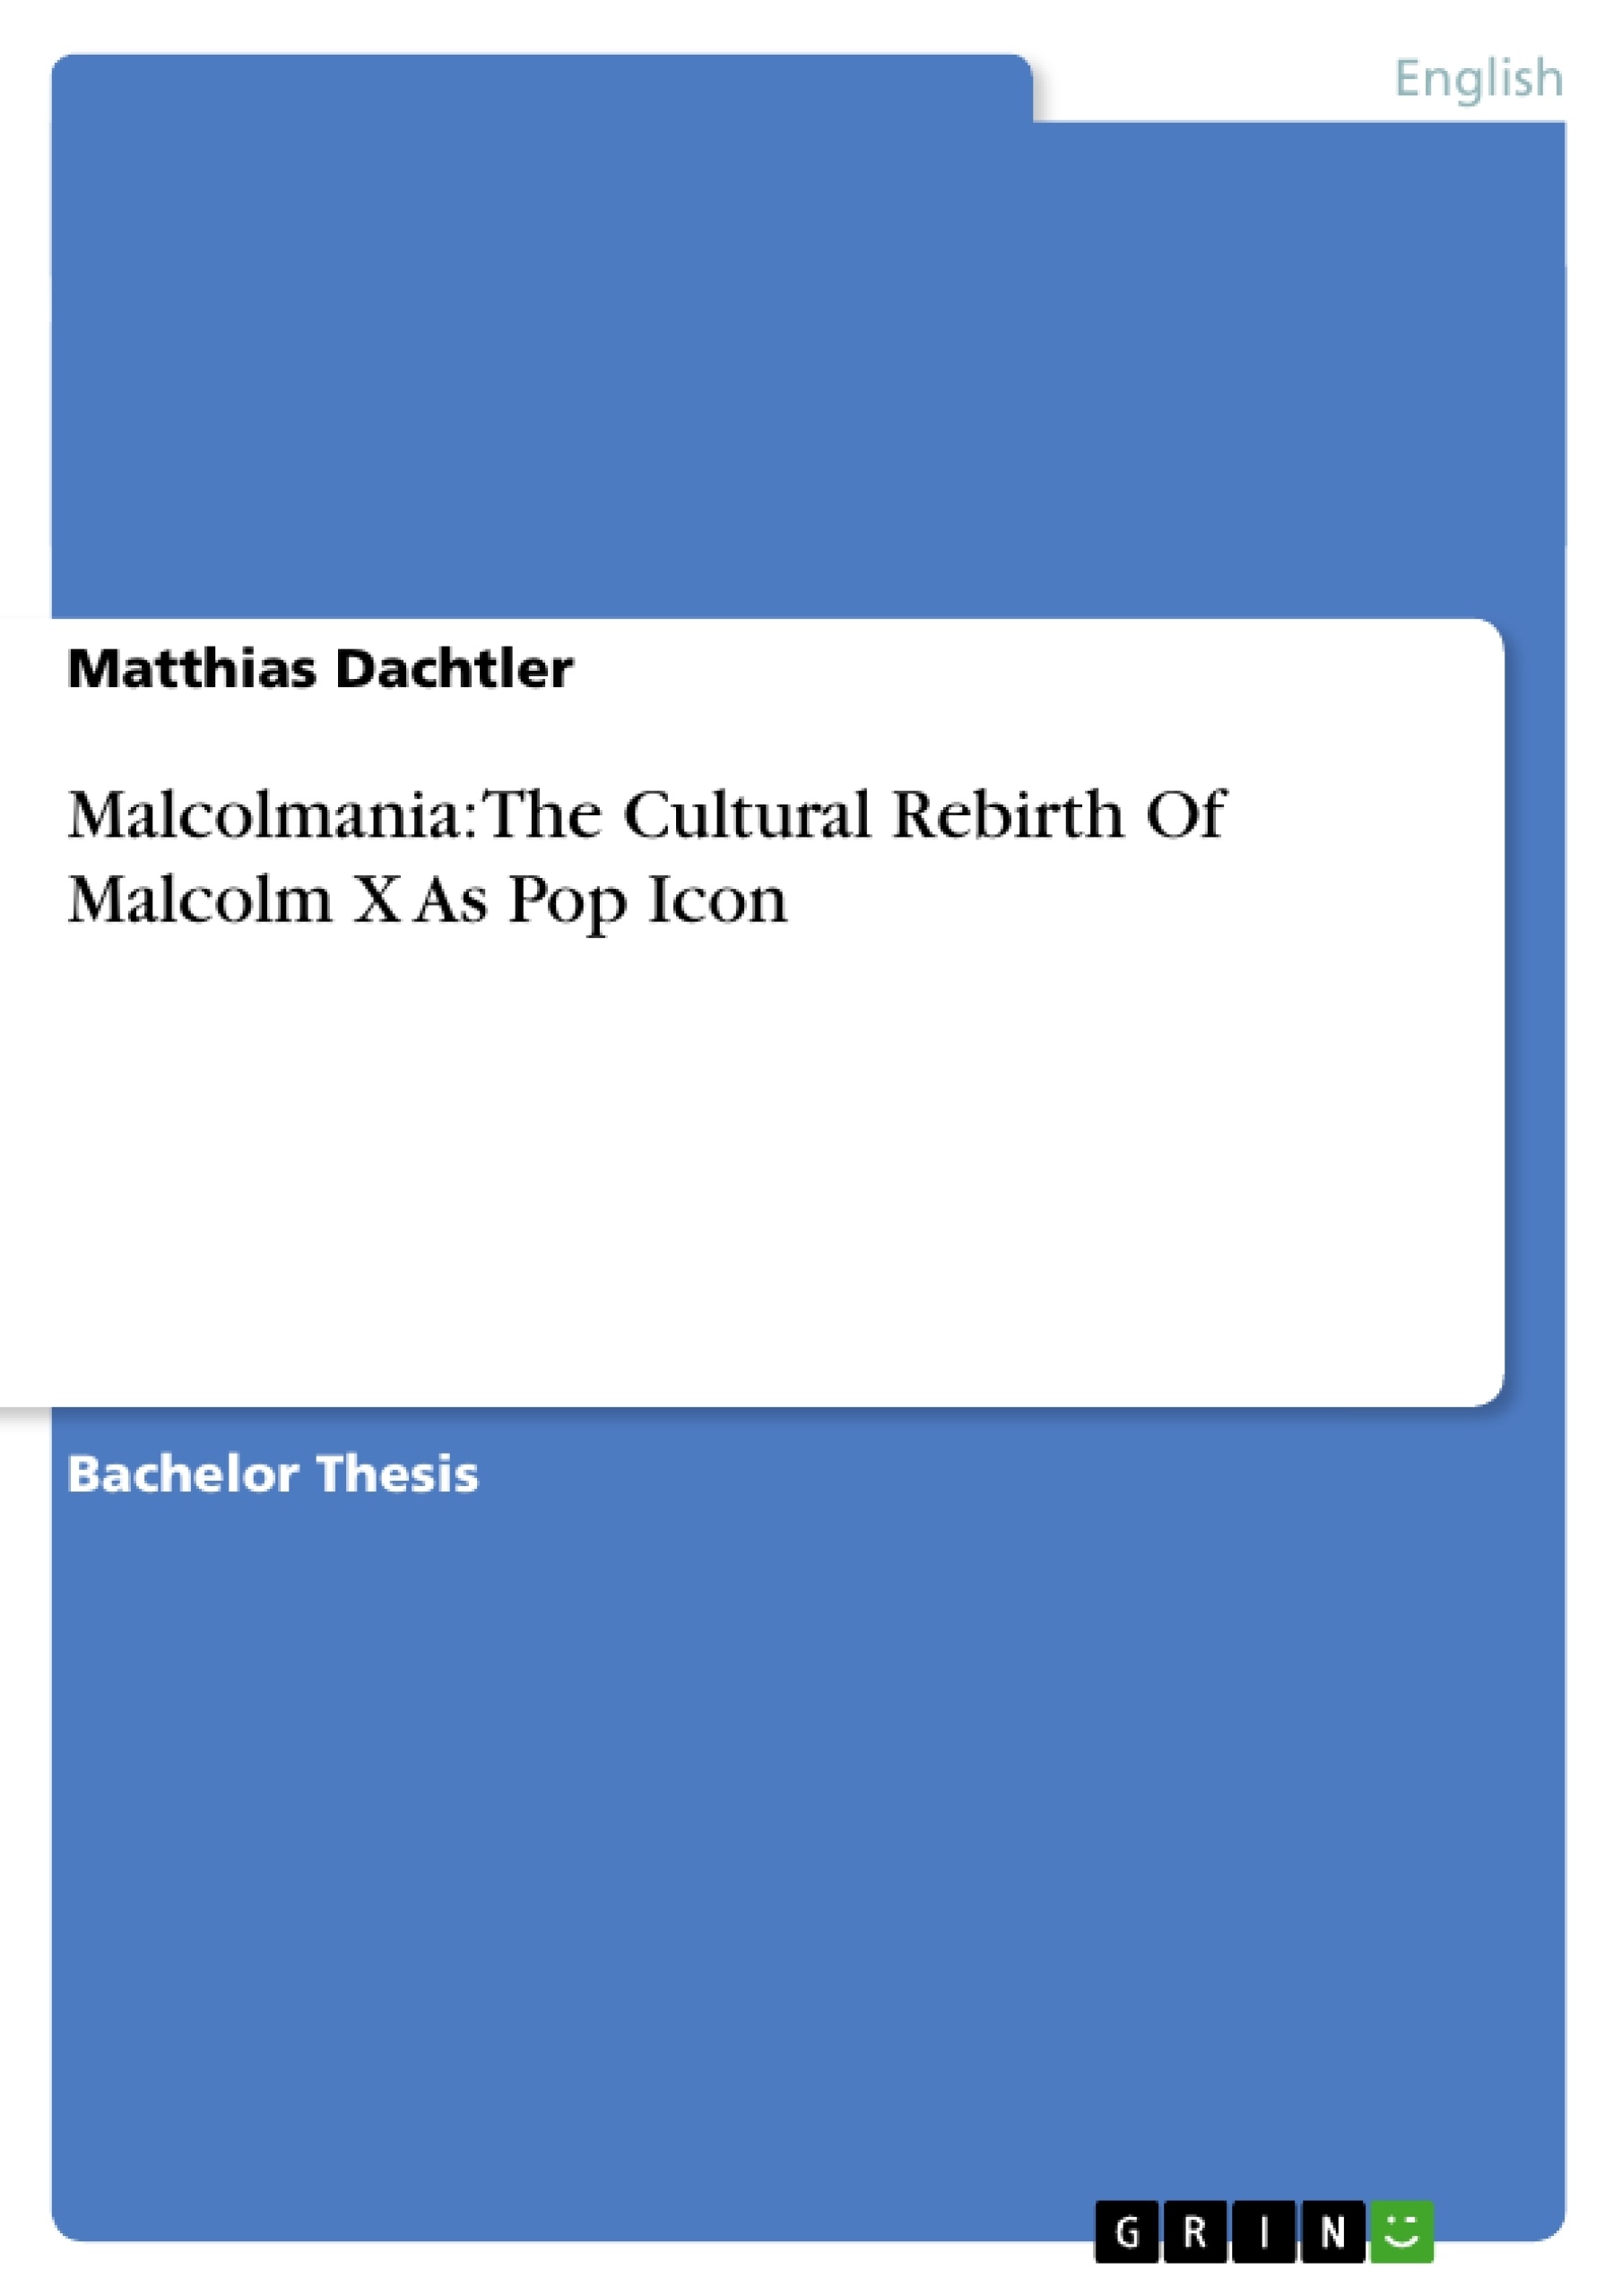 Buy research papers online cheap homeboy by malcolm x